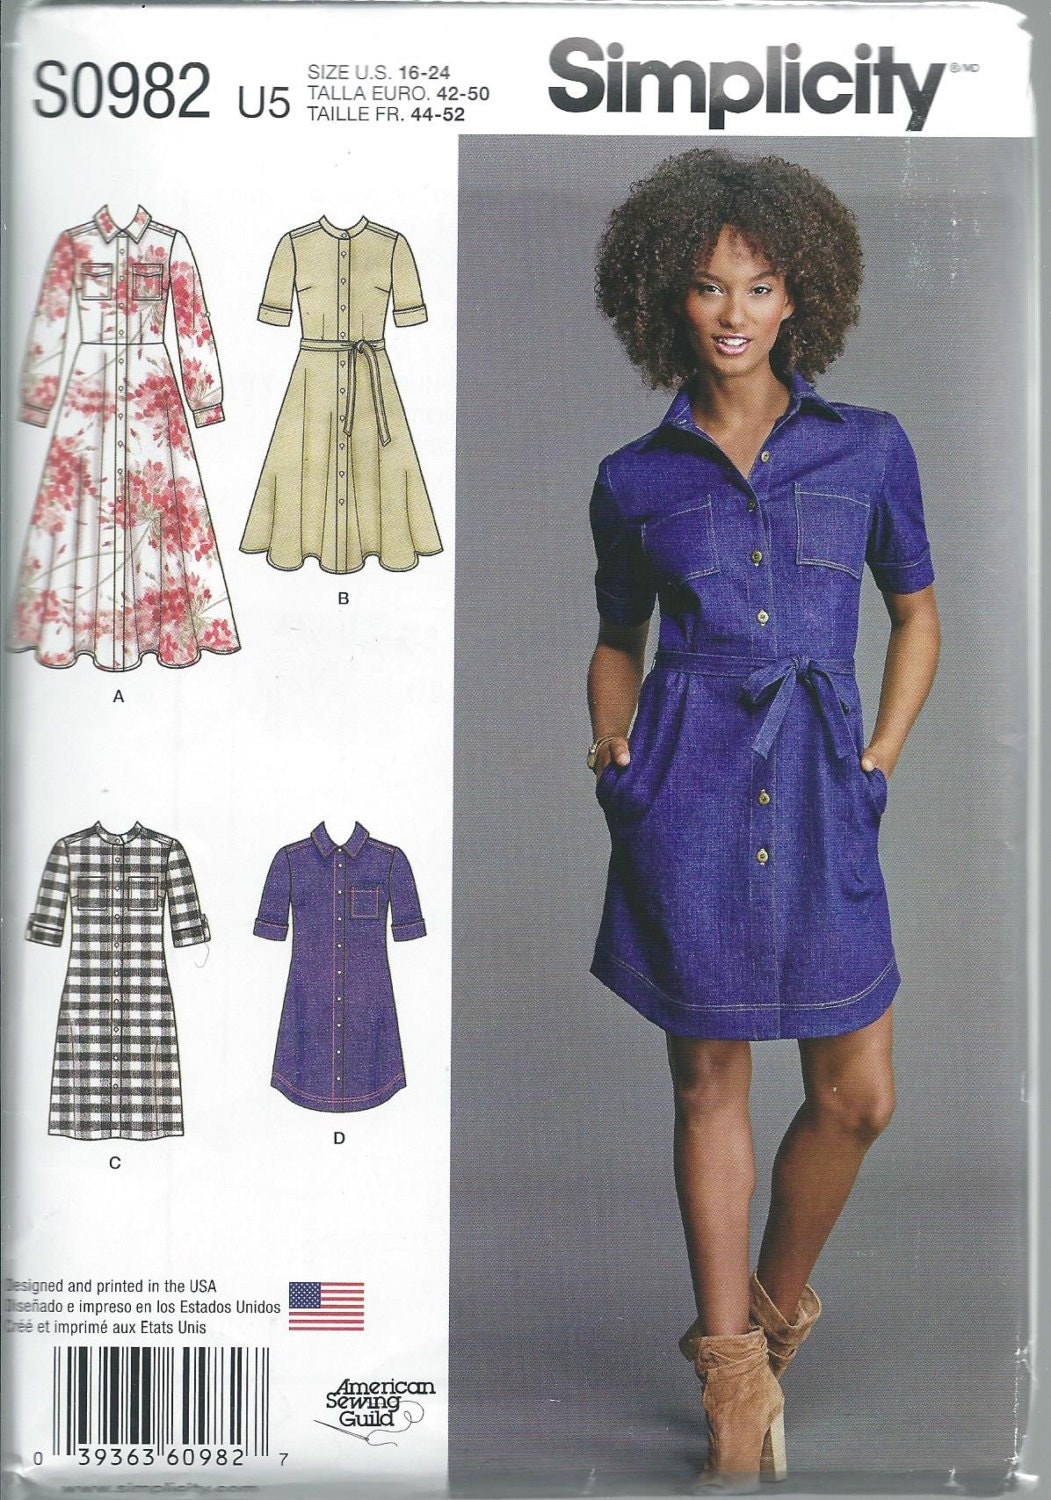 Simplicity 8014 Sewing Pattern Misses Shirt Dress S0982 Womens